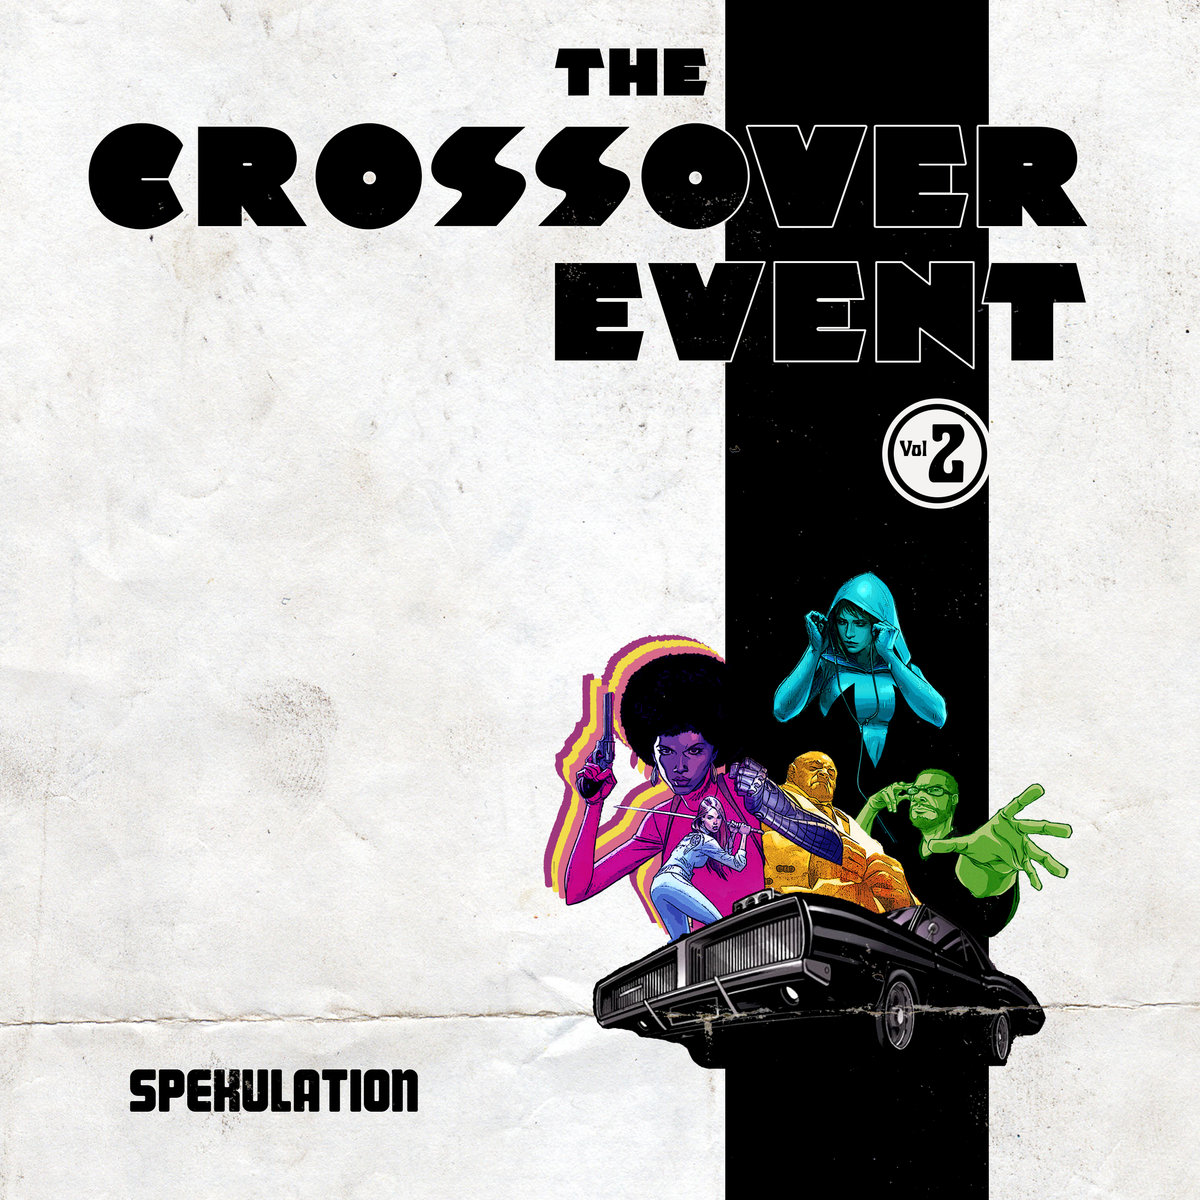 The Crossover Event Vol. 2